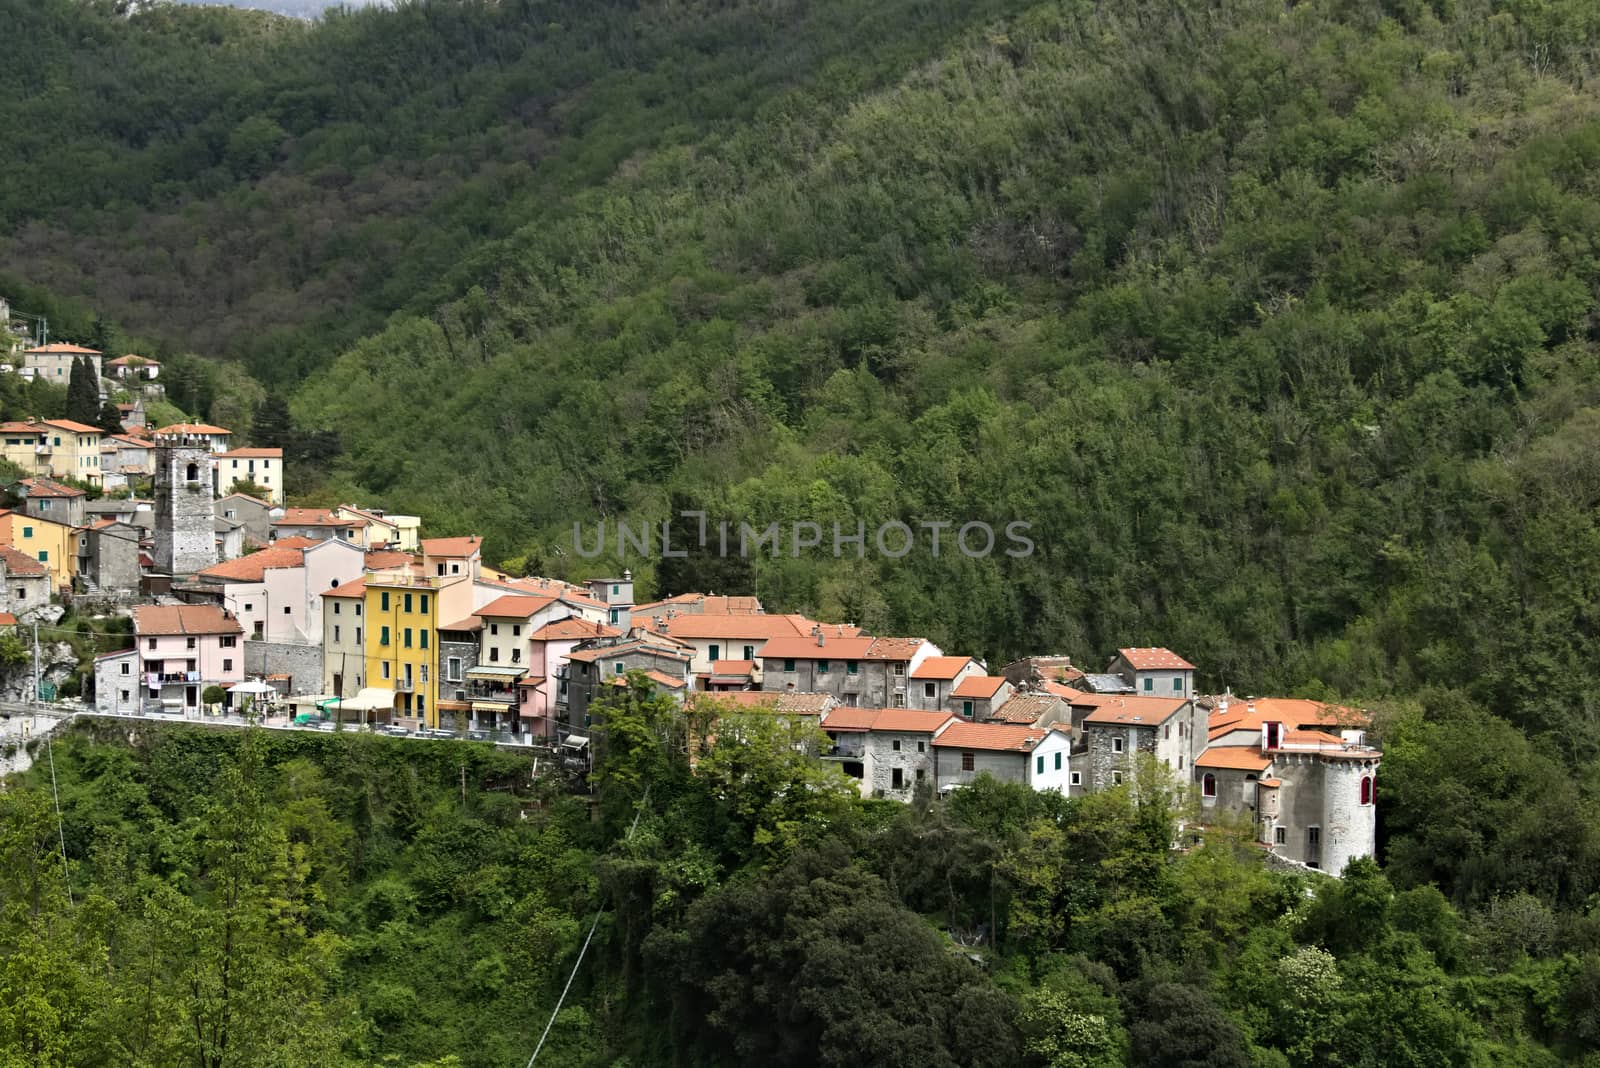 Colonnata, Carrara, Tuscany, Italy. View of the town of Colonnata, famous for the production of lard.The walls of the houses in stone and white Carrara marble. Woods background. Northern Tuscany.